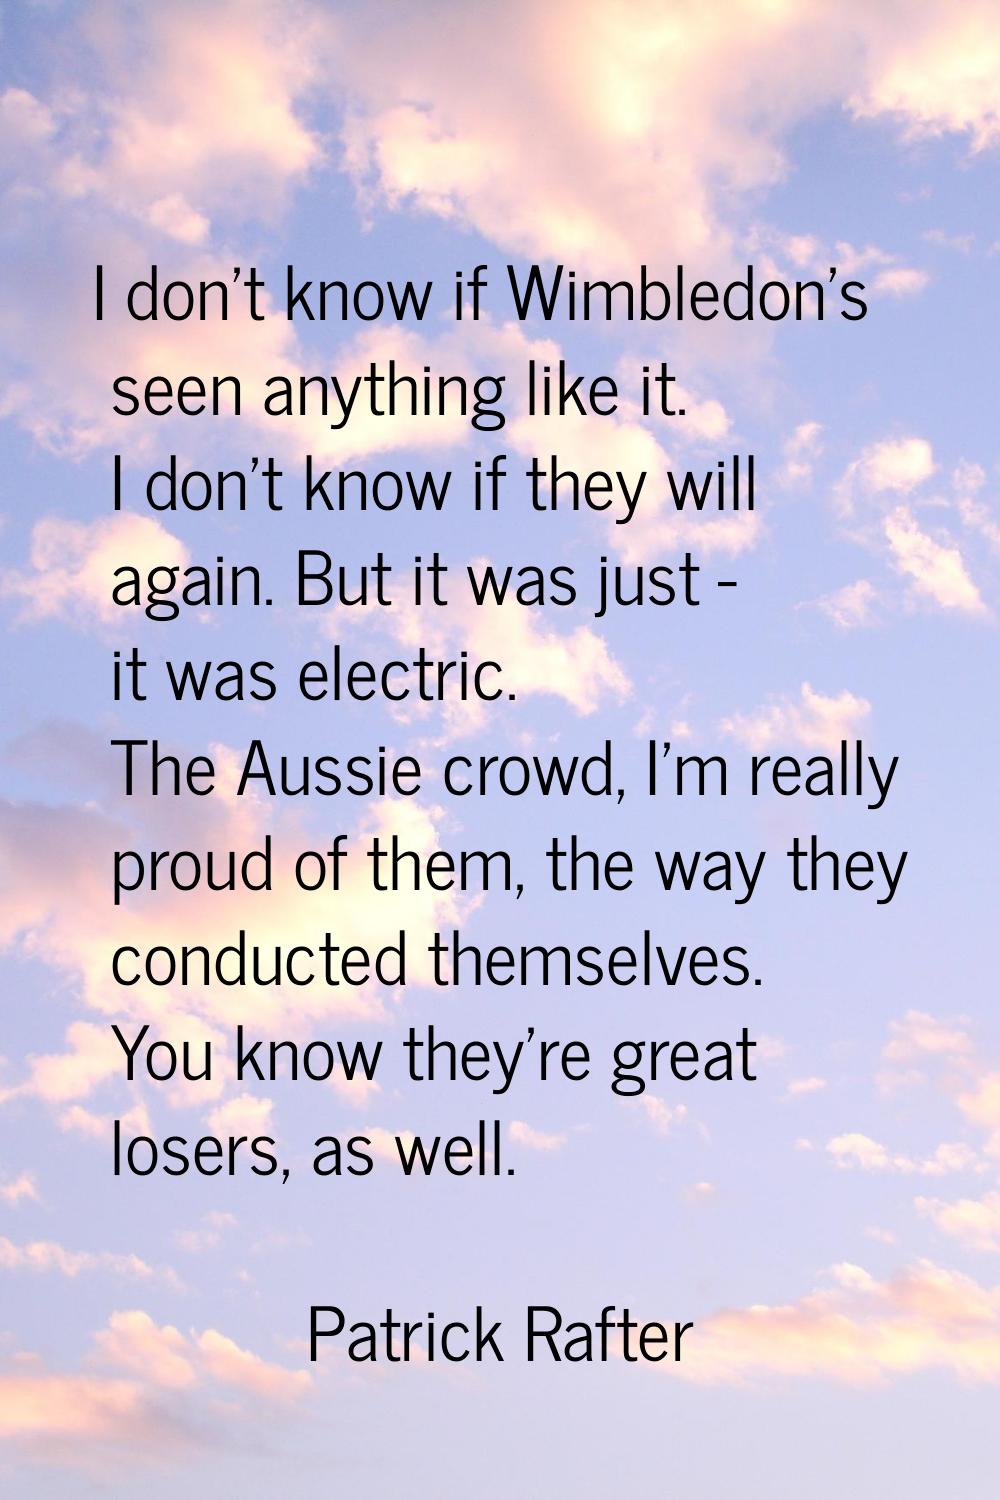 I don't know if Wimbledon's seen anything like it. I don't know if they will again. But it was just